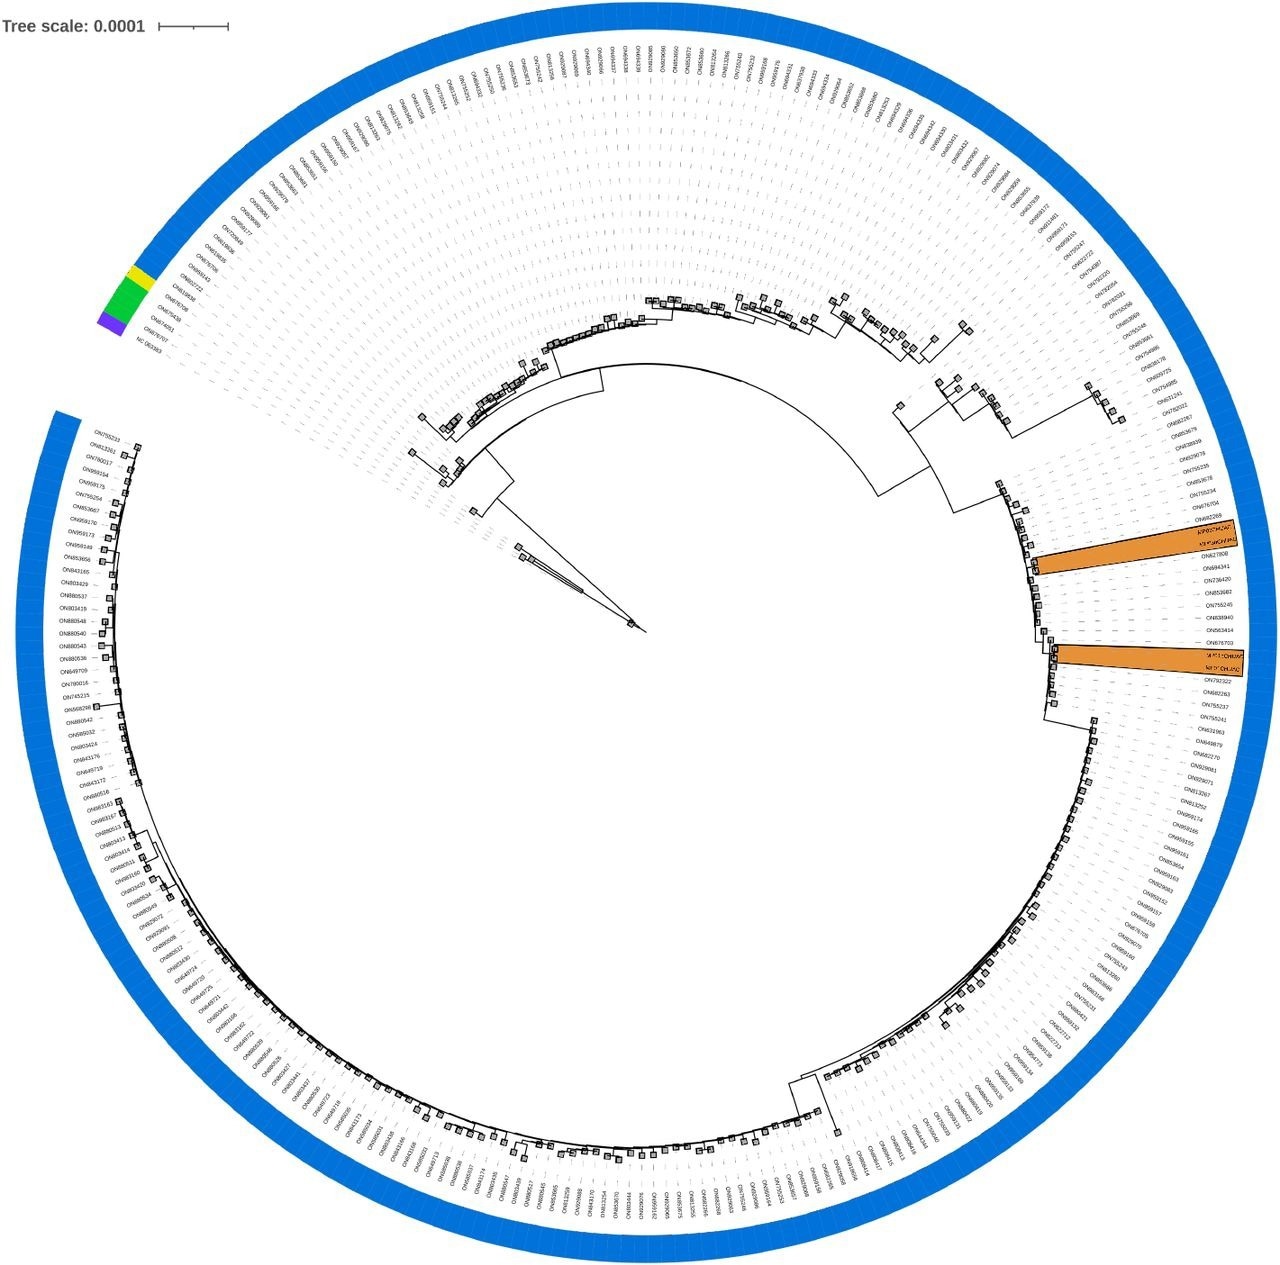 Phylogenomic tree.  Phylogenomic analysis of the present study's samples, comparing them to all complete MPXV genomes available in GenBank to date (2022-07-18, 275 genomes from taxid 10244).  This does not pretend to infer the evolution of the virus, only to locate the most similar entries to the samples in this study.  A color strip indicates each sample's lineage (A: purple, A.1.1: yellow, A.2: green, B.1: blue), and orange areas highlight the study's samples.